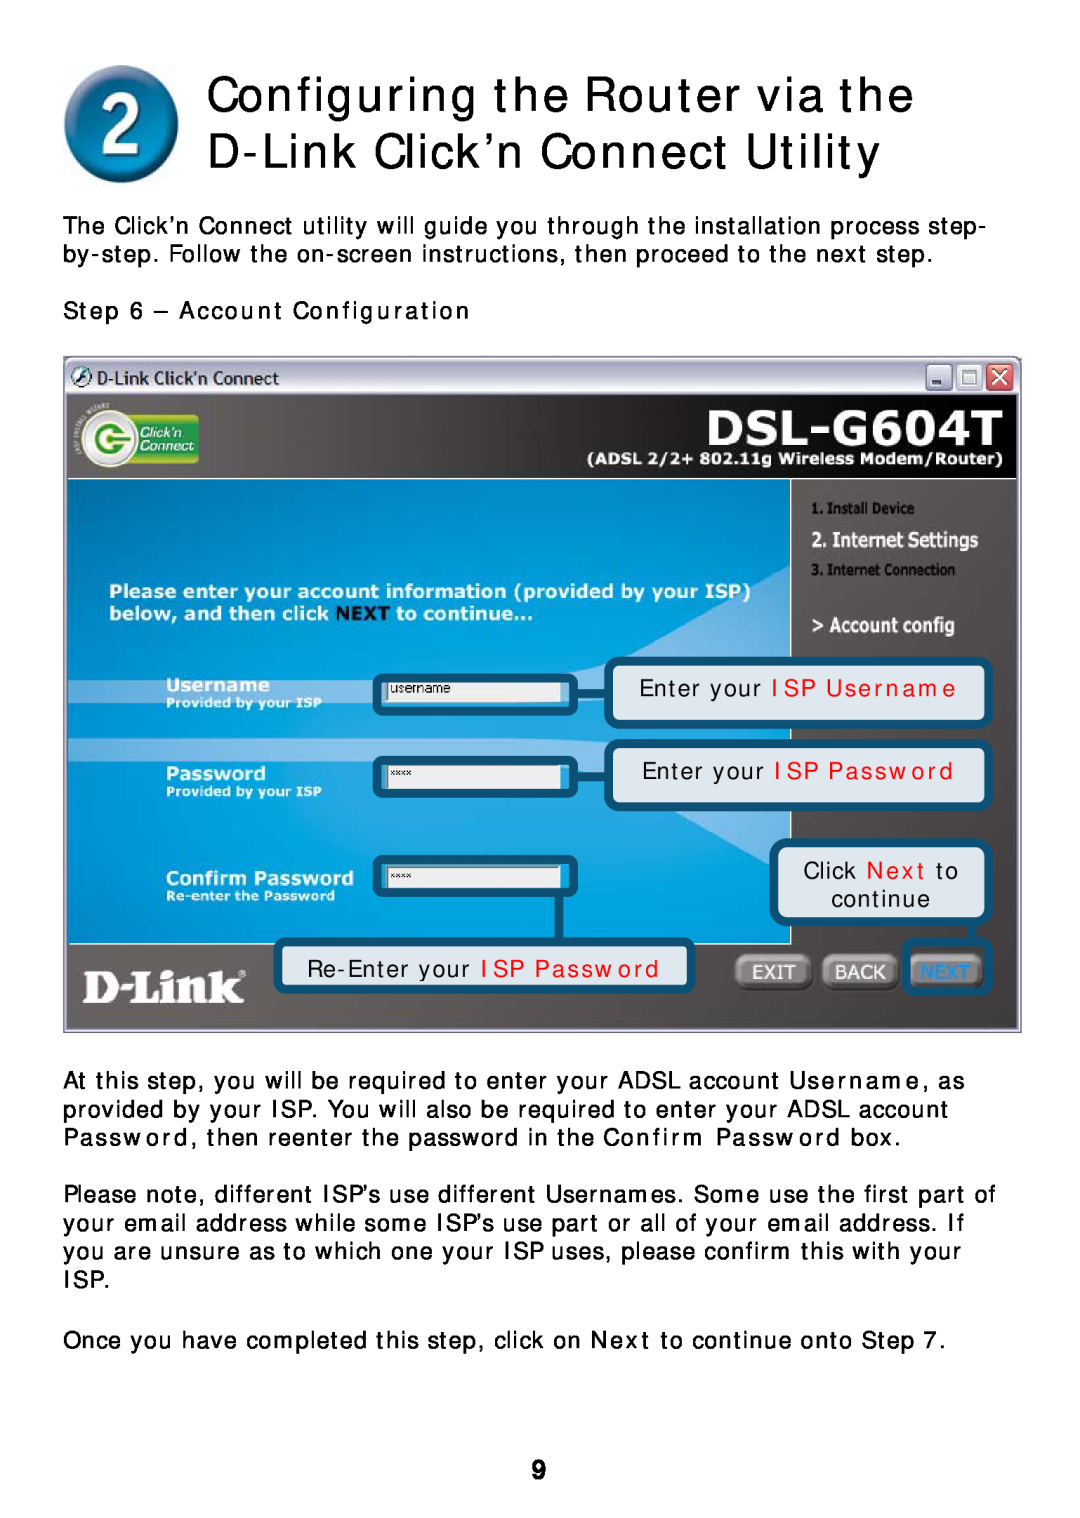 D-Link DSL-G604T specifications Configuring the Router via the D-Link Click’n Connect Utility, Account Configuration 